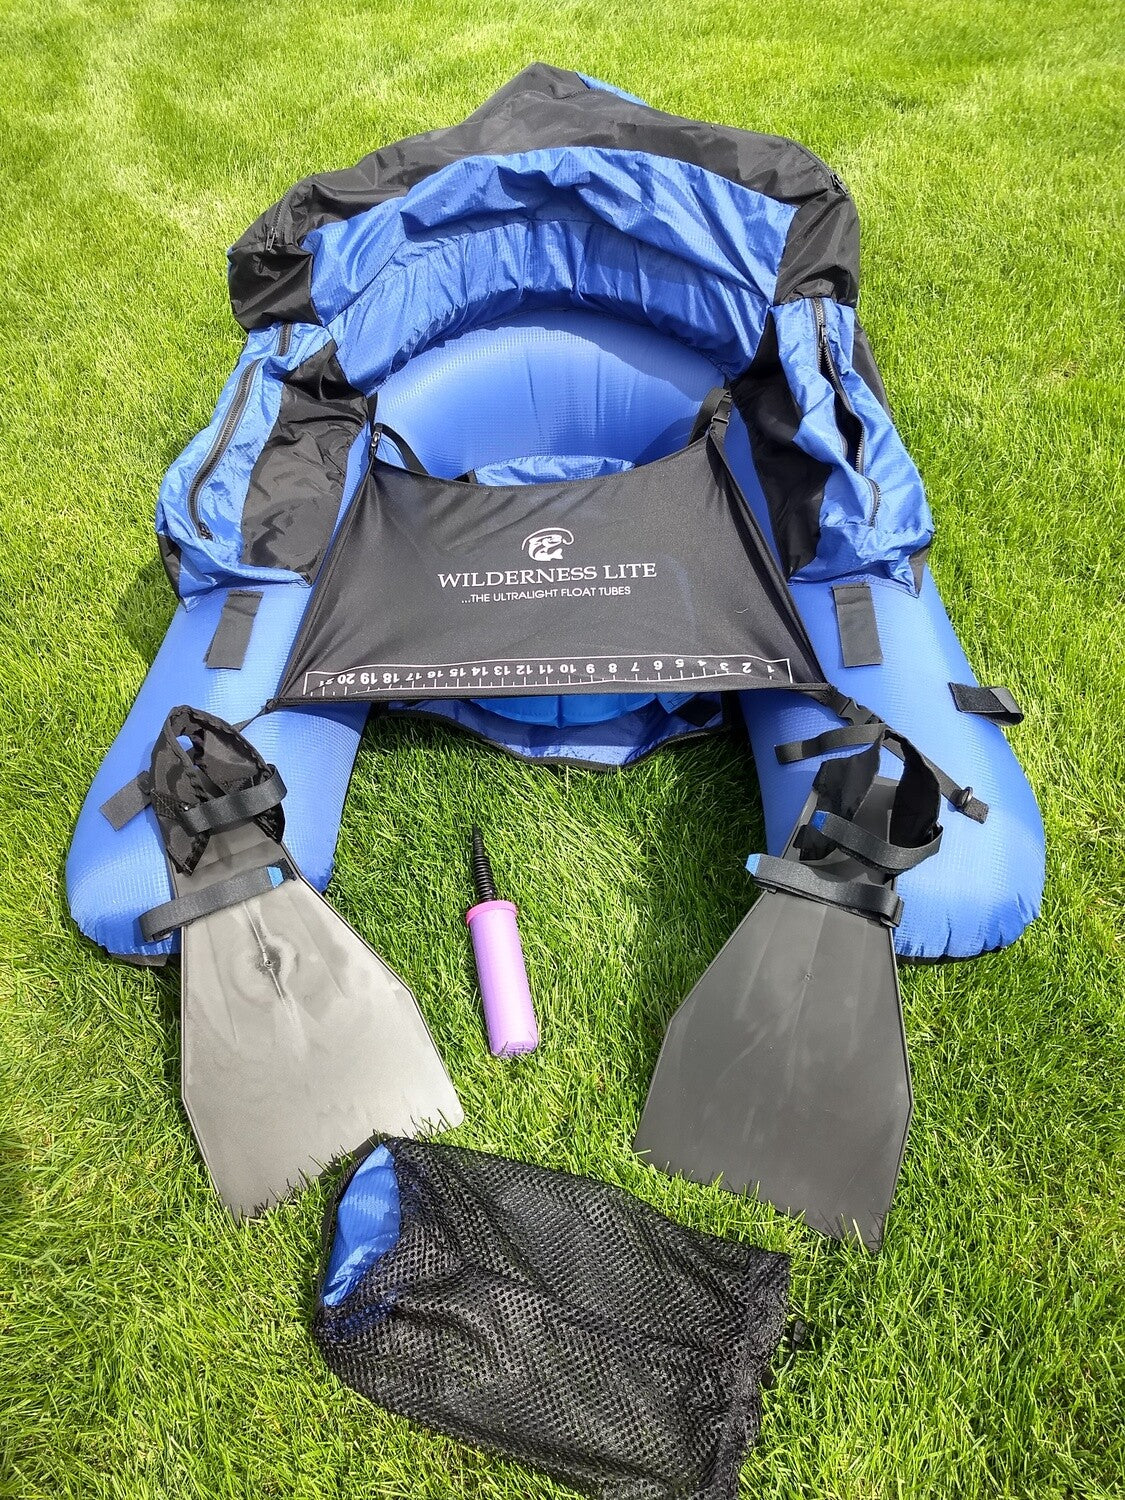 The Backpacker Pro complete ultralight float tube in this picture includes all the untralight features needed for a day hike, a long weekend, or a week or more of fishing high mountain lakes in the wilderness.  